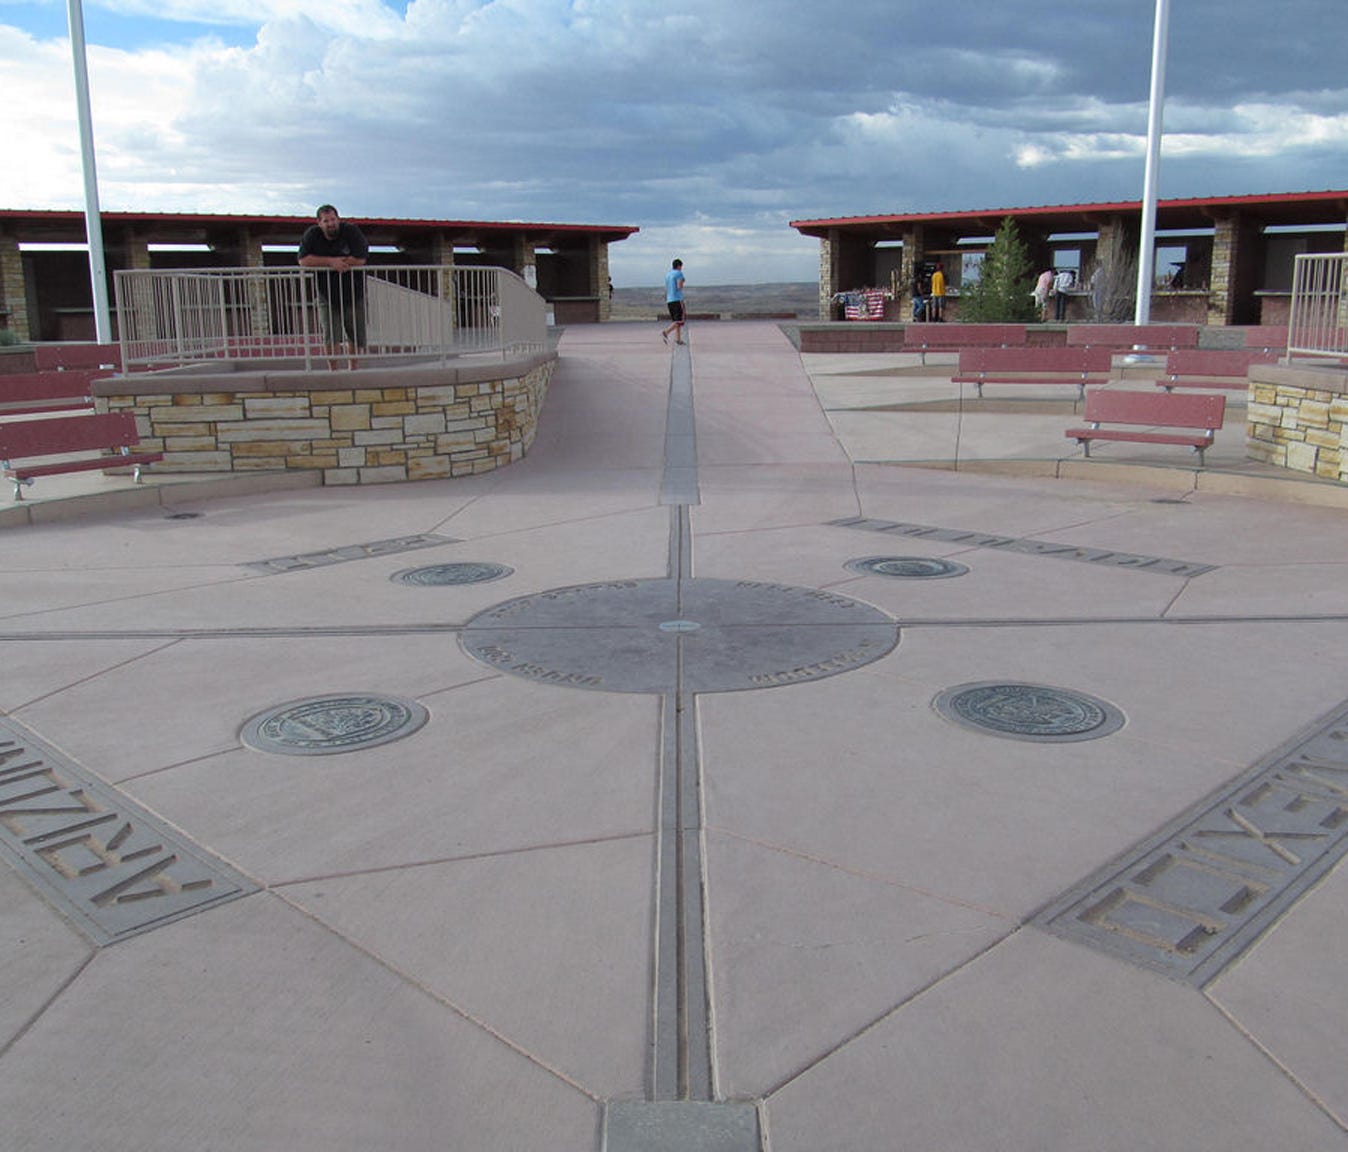 The Four Corners Monument has been expanded and now offers an interpretive center with restrooms. It's still not worth going out of your way to see.